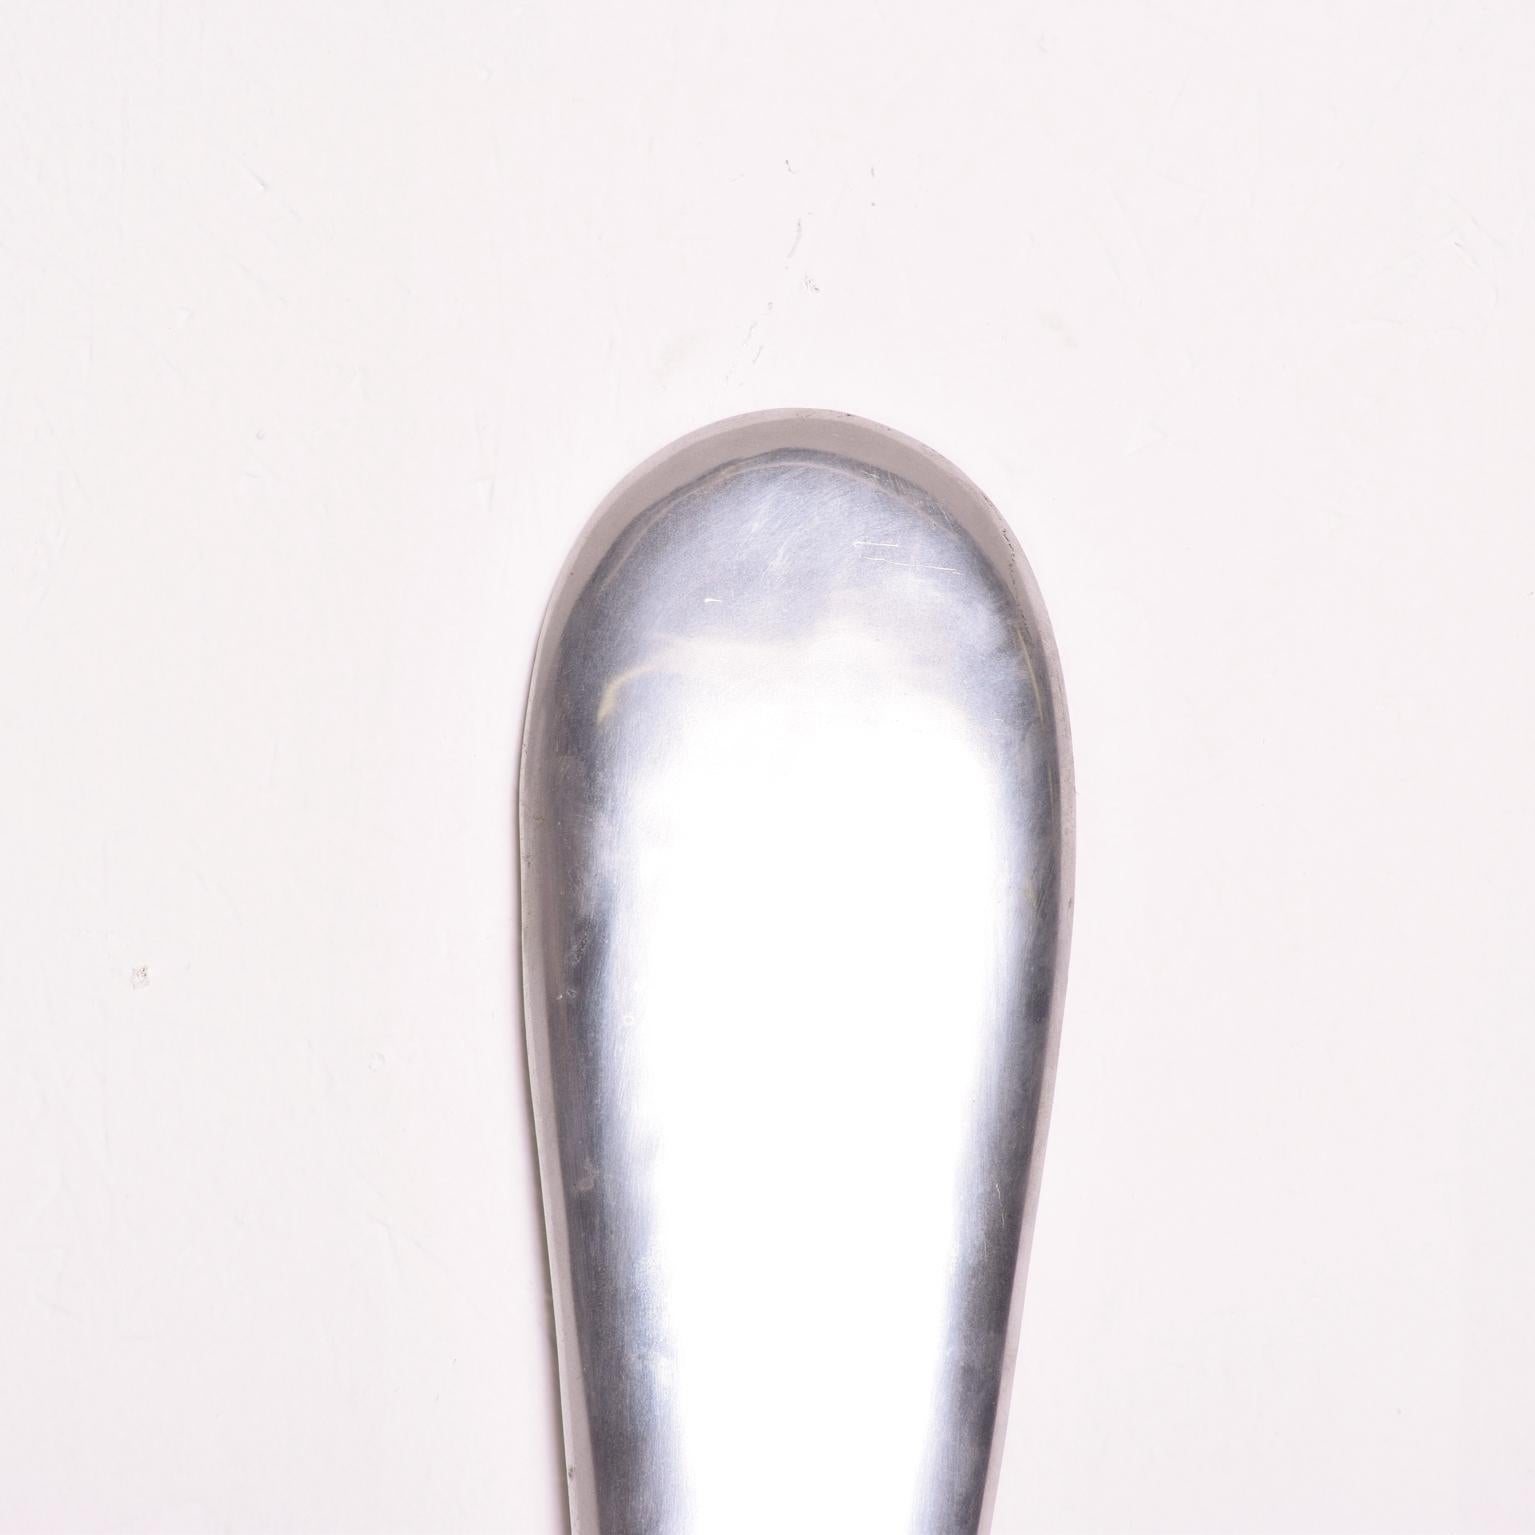 We are pleased to offer for your consideration an oversized aluminum spoon sculpture. Attributed to C Jere. Not signed or label present from the maker. Made in the USA, circa 1970s. The spoon can be hung into the wall. Dimensions: 46 1/2